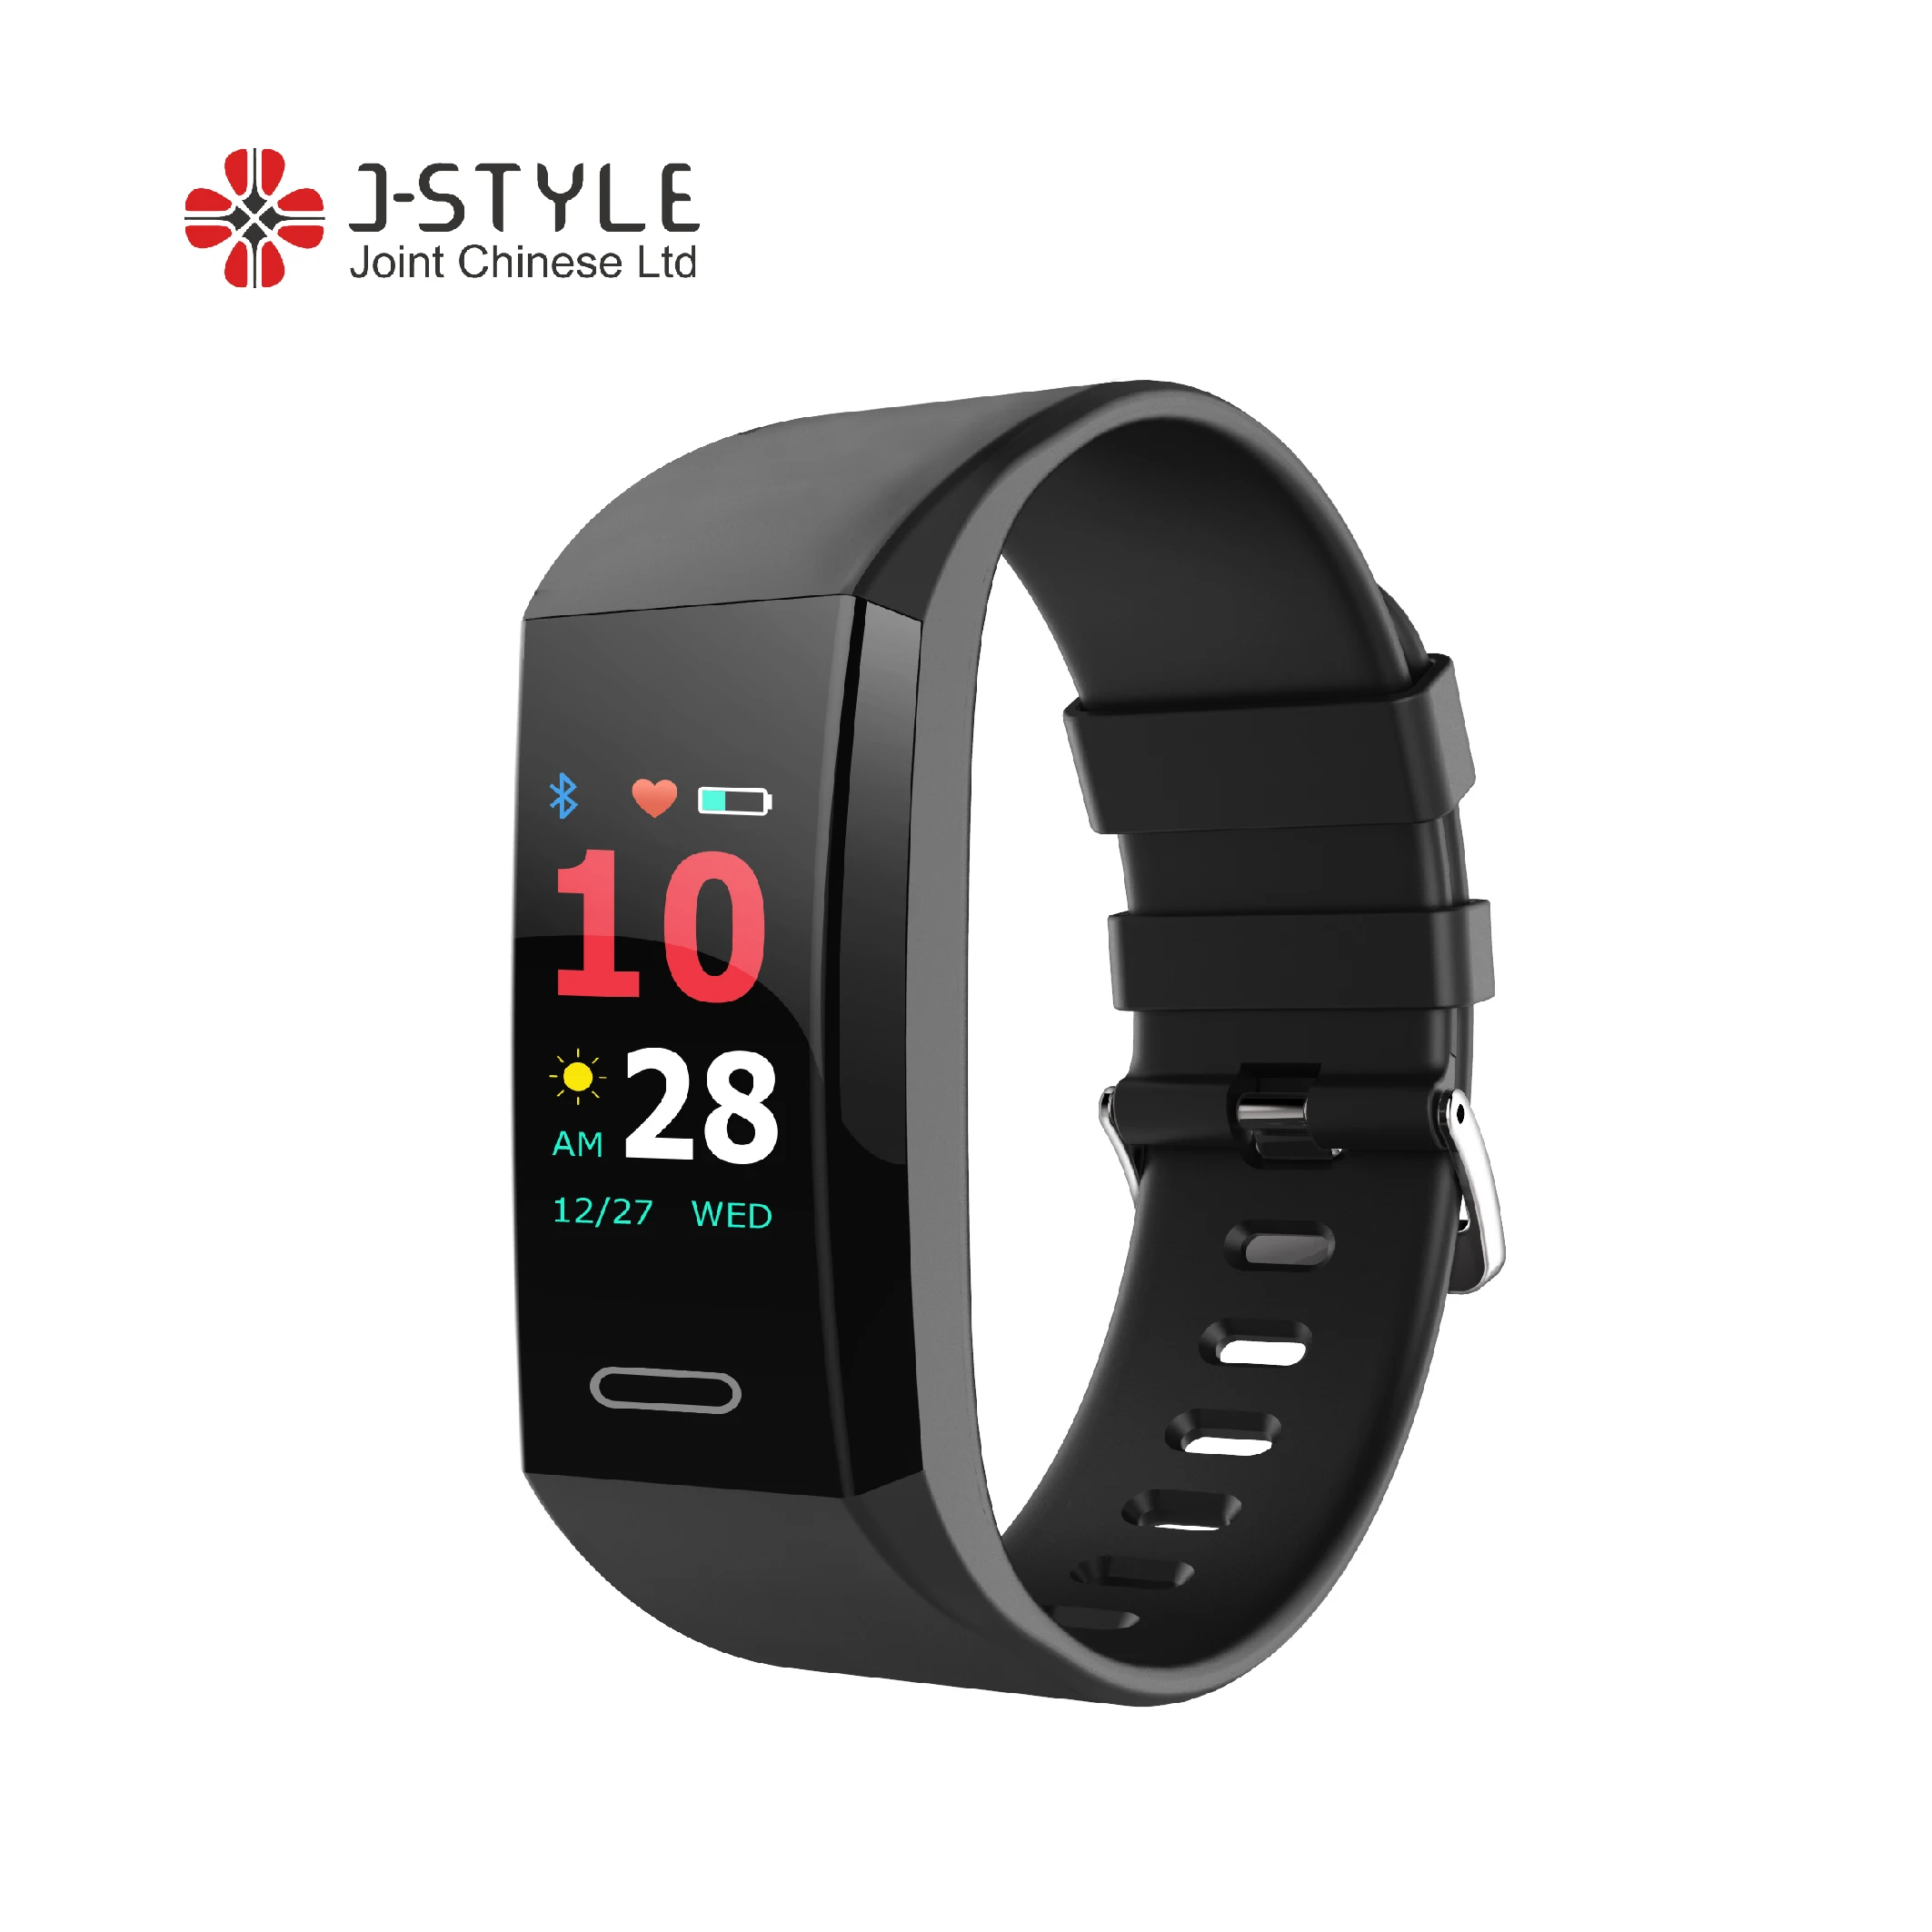 

Factory price smart bracelet gps tracking waterproof heart rate monitor smart watch with SDK support api or sdk, Black, blue,customized color